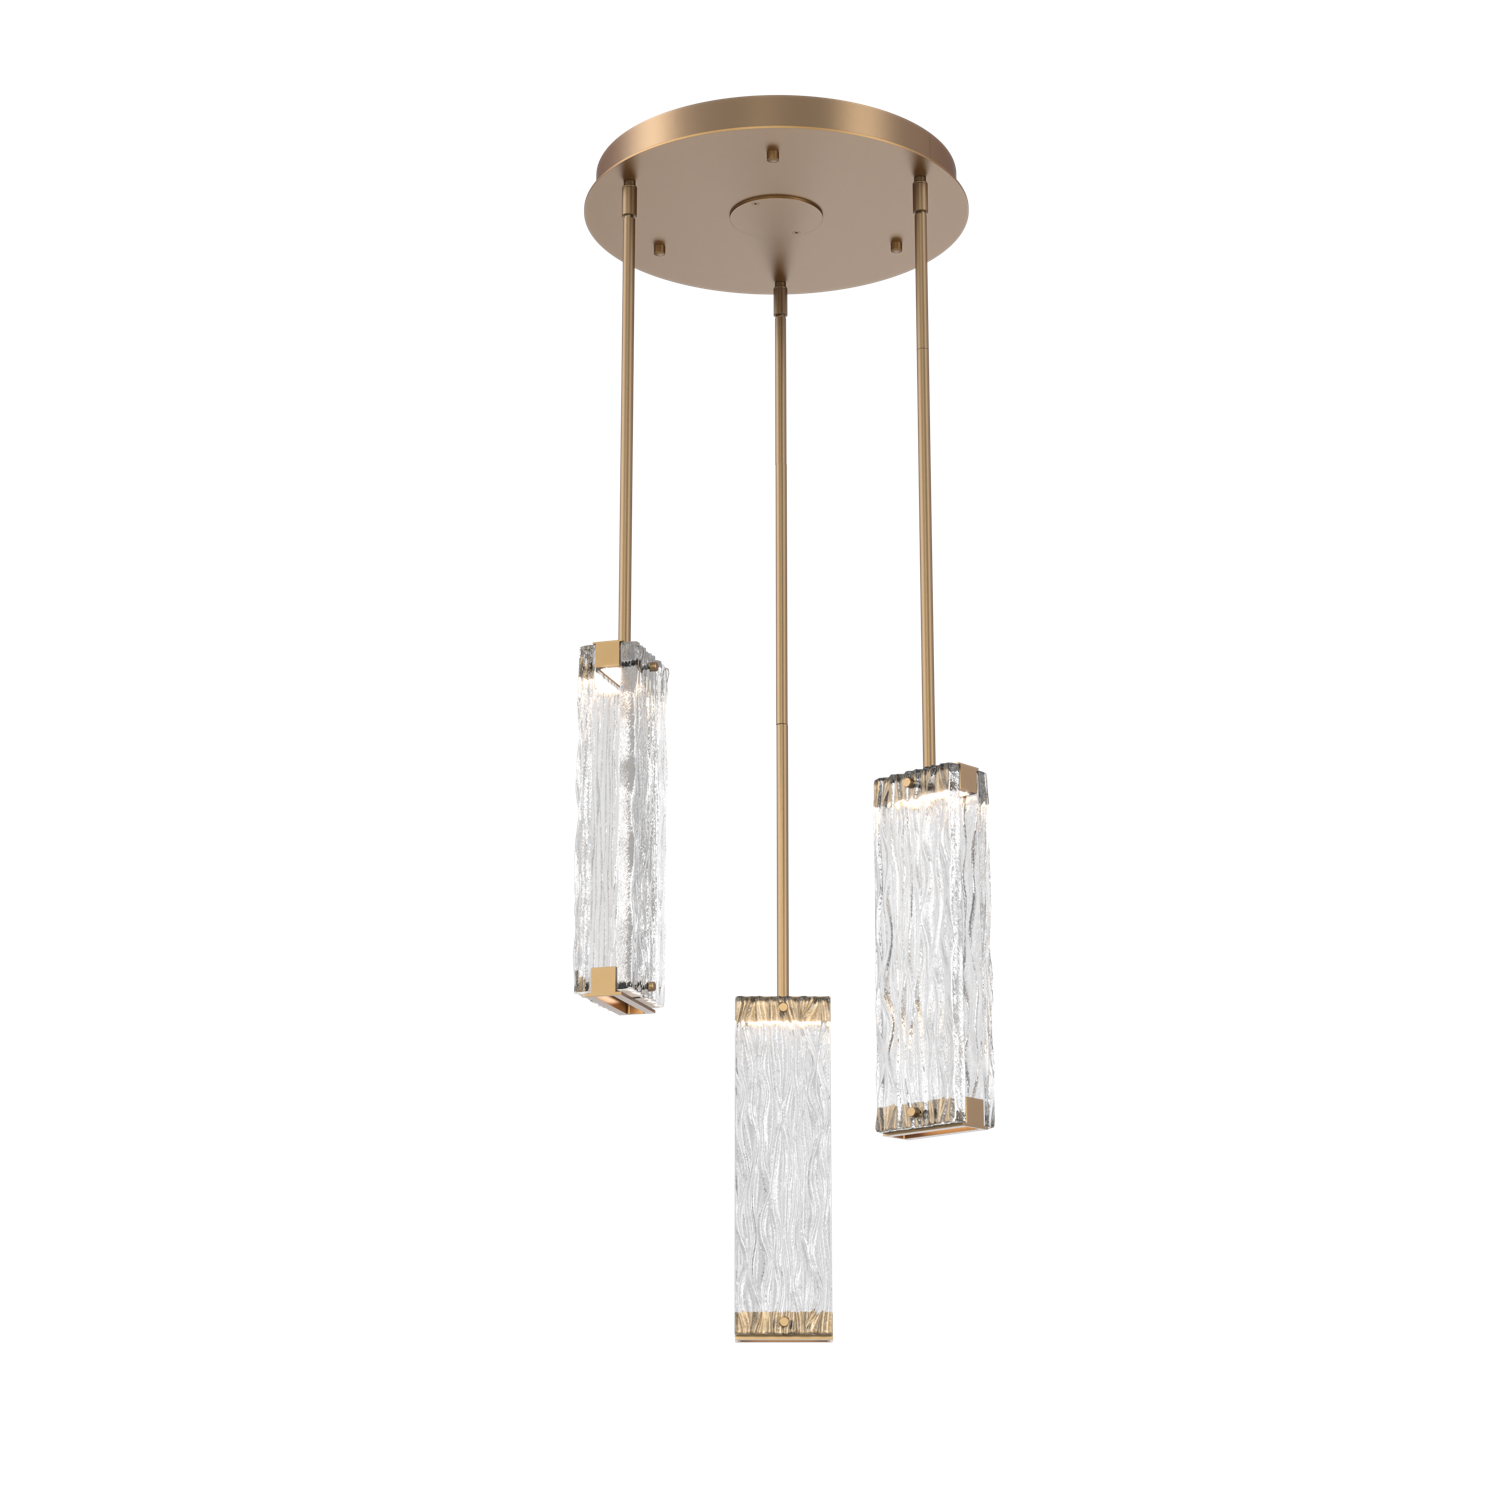 CHB0090-03-NB-TT-Hammerton-Studio-Tabulo-3-light-multi-pendant-chandelier-with-novel-brass-finish-and-clear-tidal-cast-glass-shade-and-LED-lamping